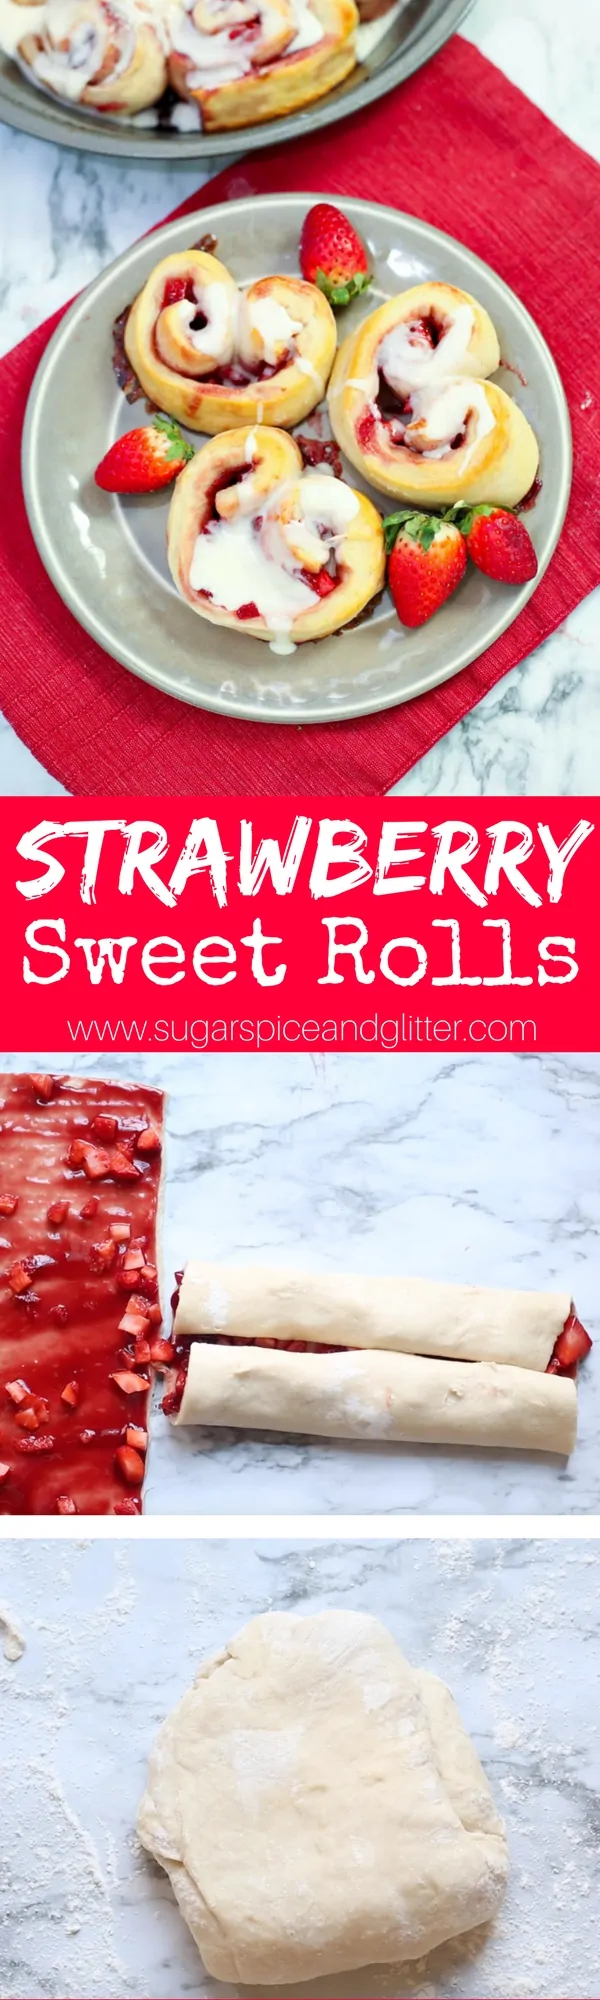 Delicious strawberry sweet rolls - the perfect Valentine's Day brunch or dessert recipe. Heart shaped sweet rolls filled with a fresh strawberry filling and drizzled with cream cheese frosting